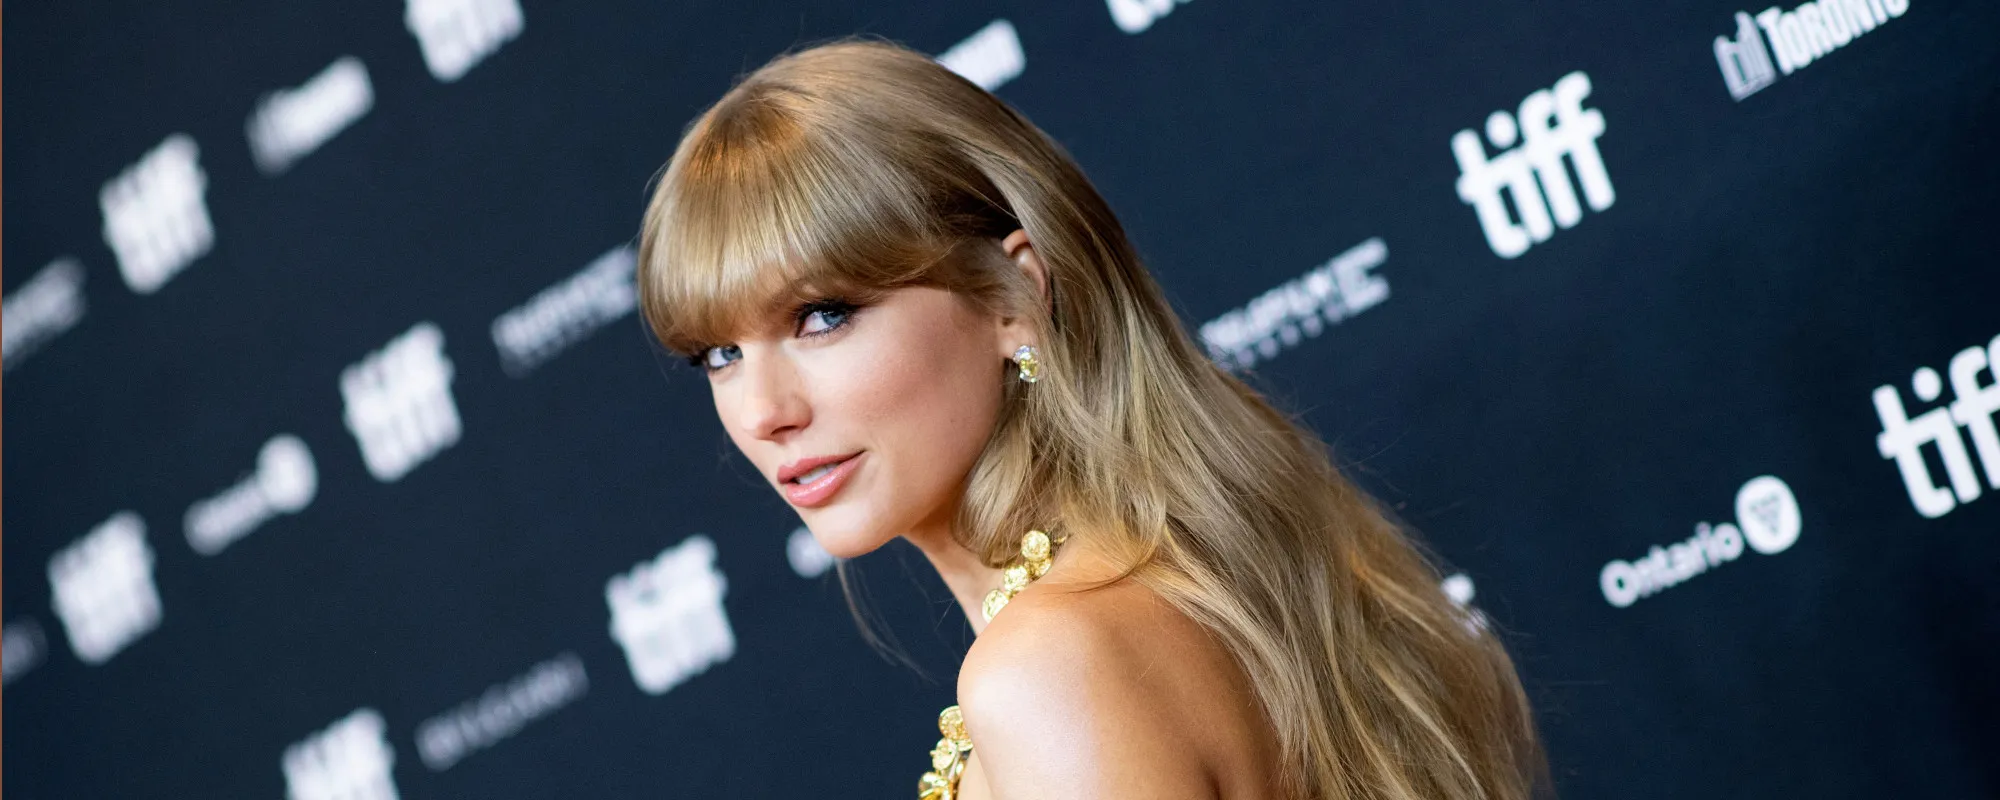 Taylor Swift Sold Limited-Edition Digital Downloads of ‘Midnights’ for 12 Hours